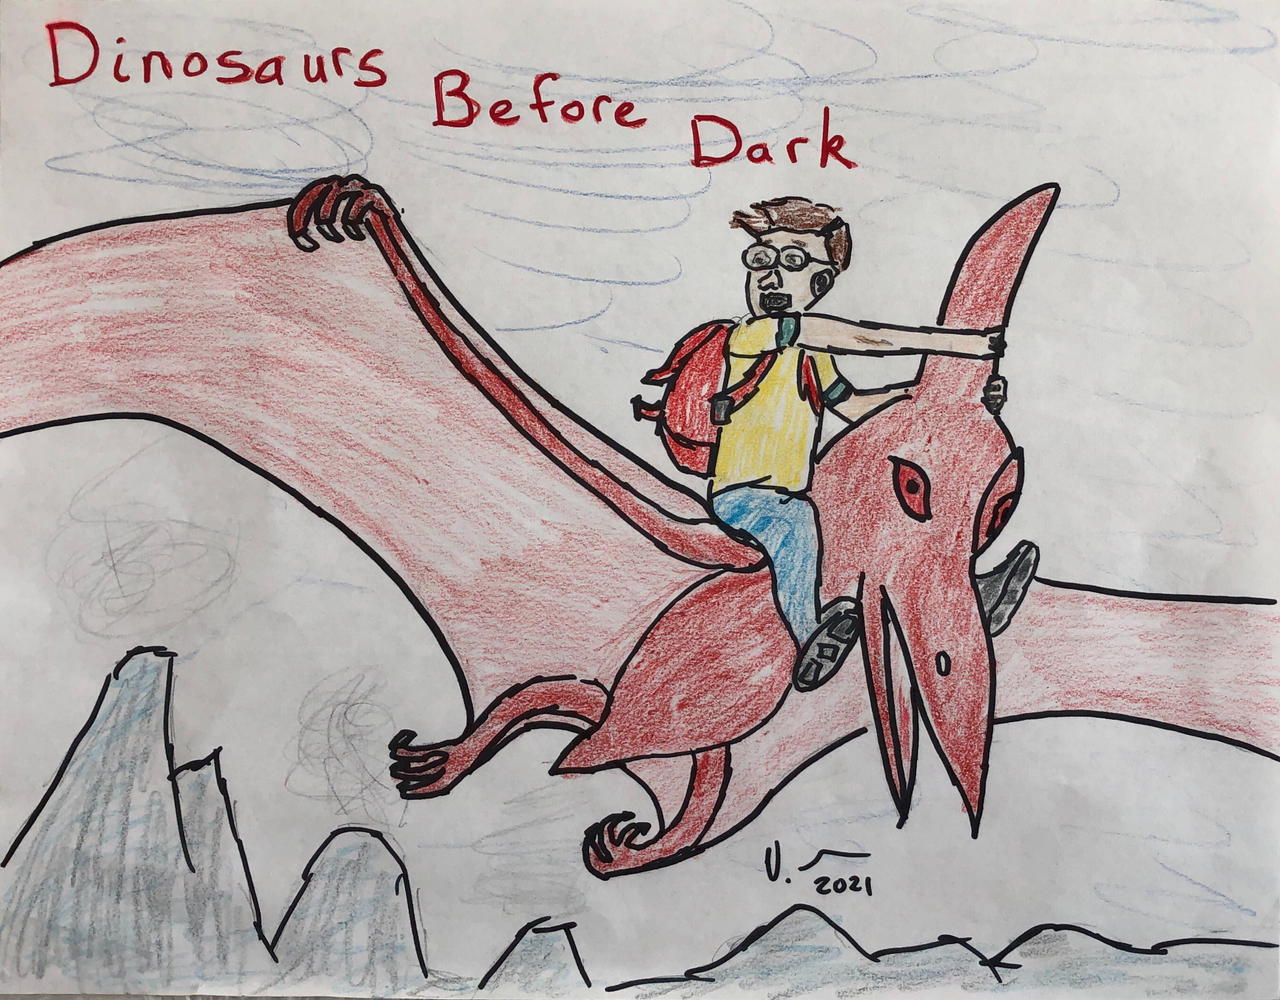 Dinosaurs Before Dark from Magic Tree House by venmey on DeviantArt